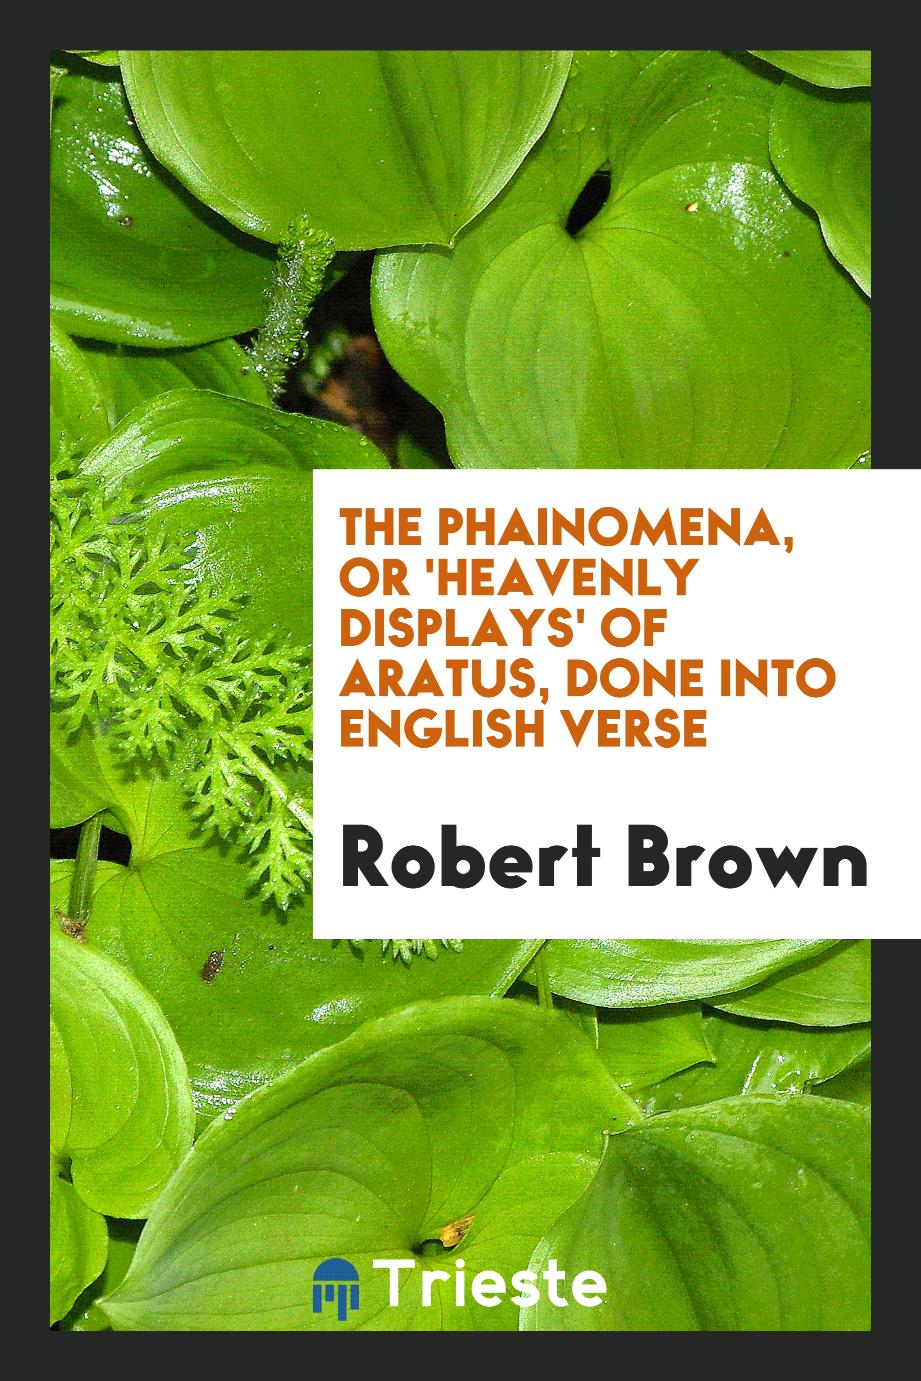 The Phainomena, or 'Heavenly Displays' of Aratus, Done into English Verse